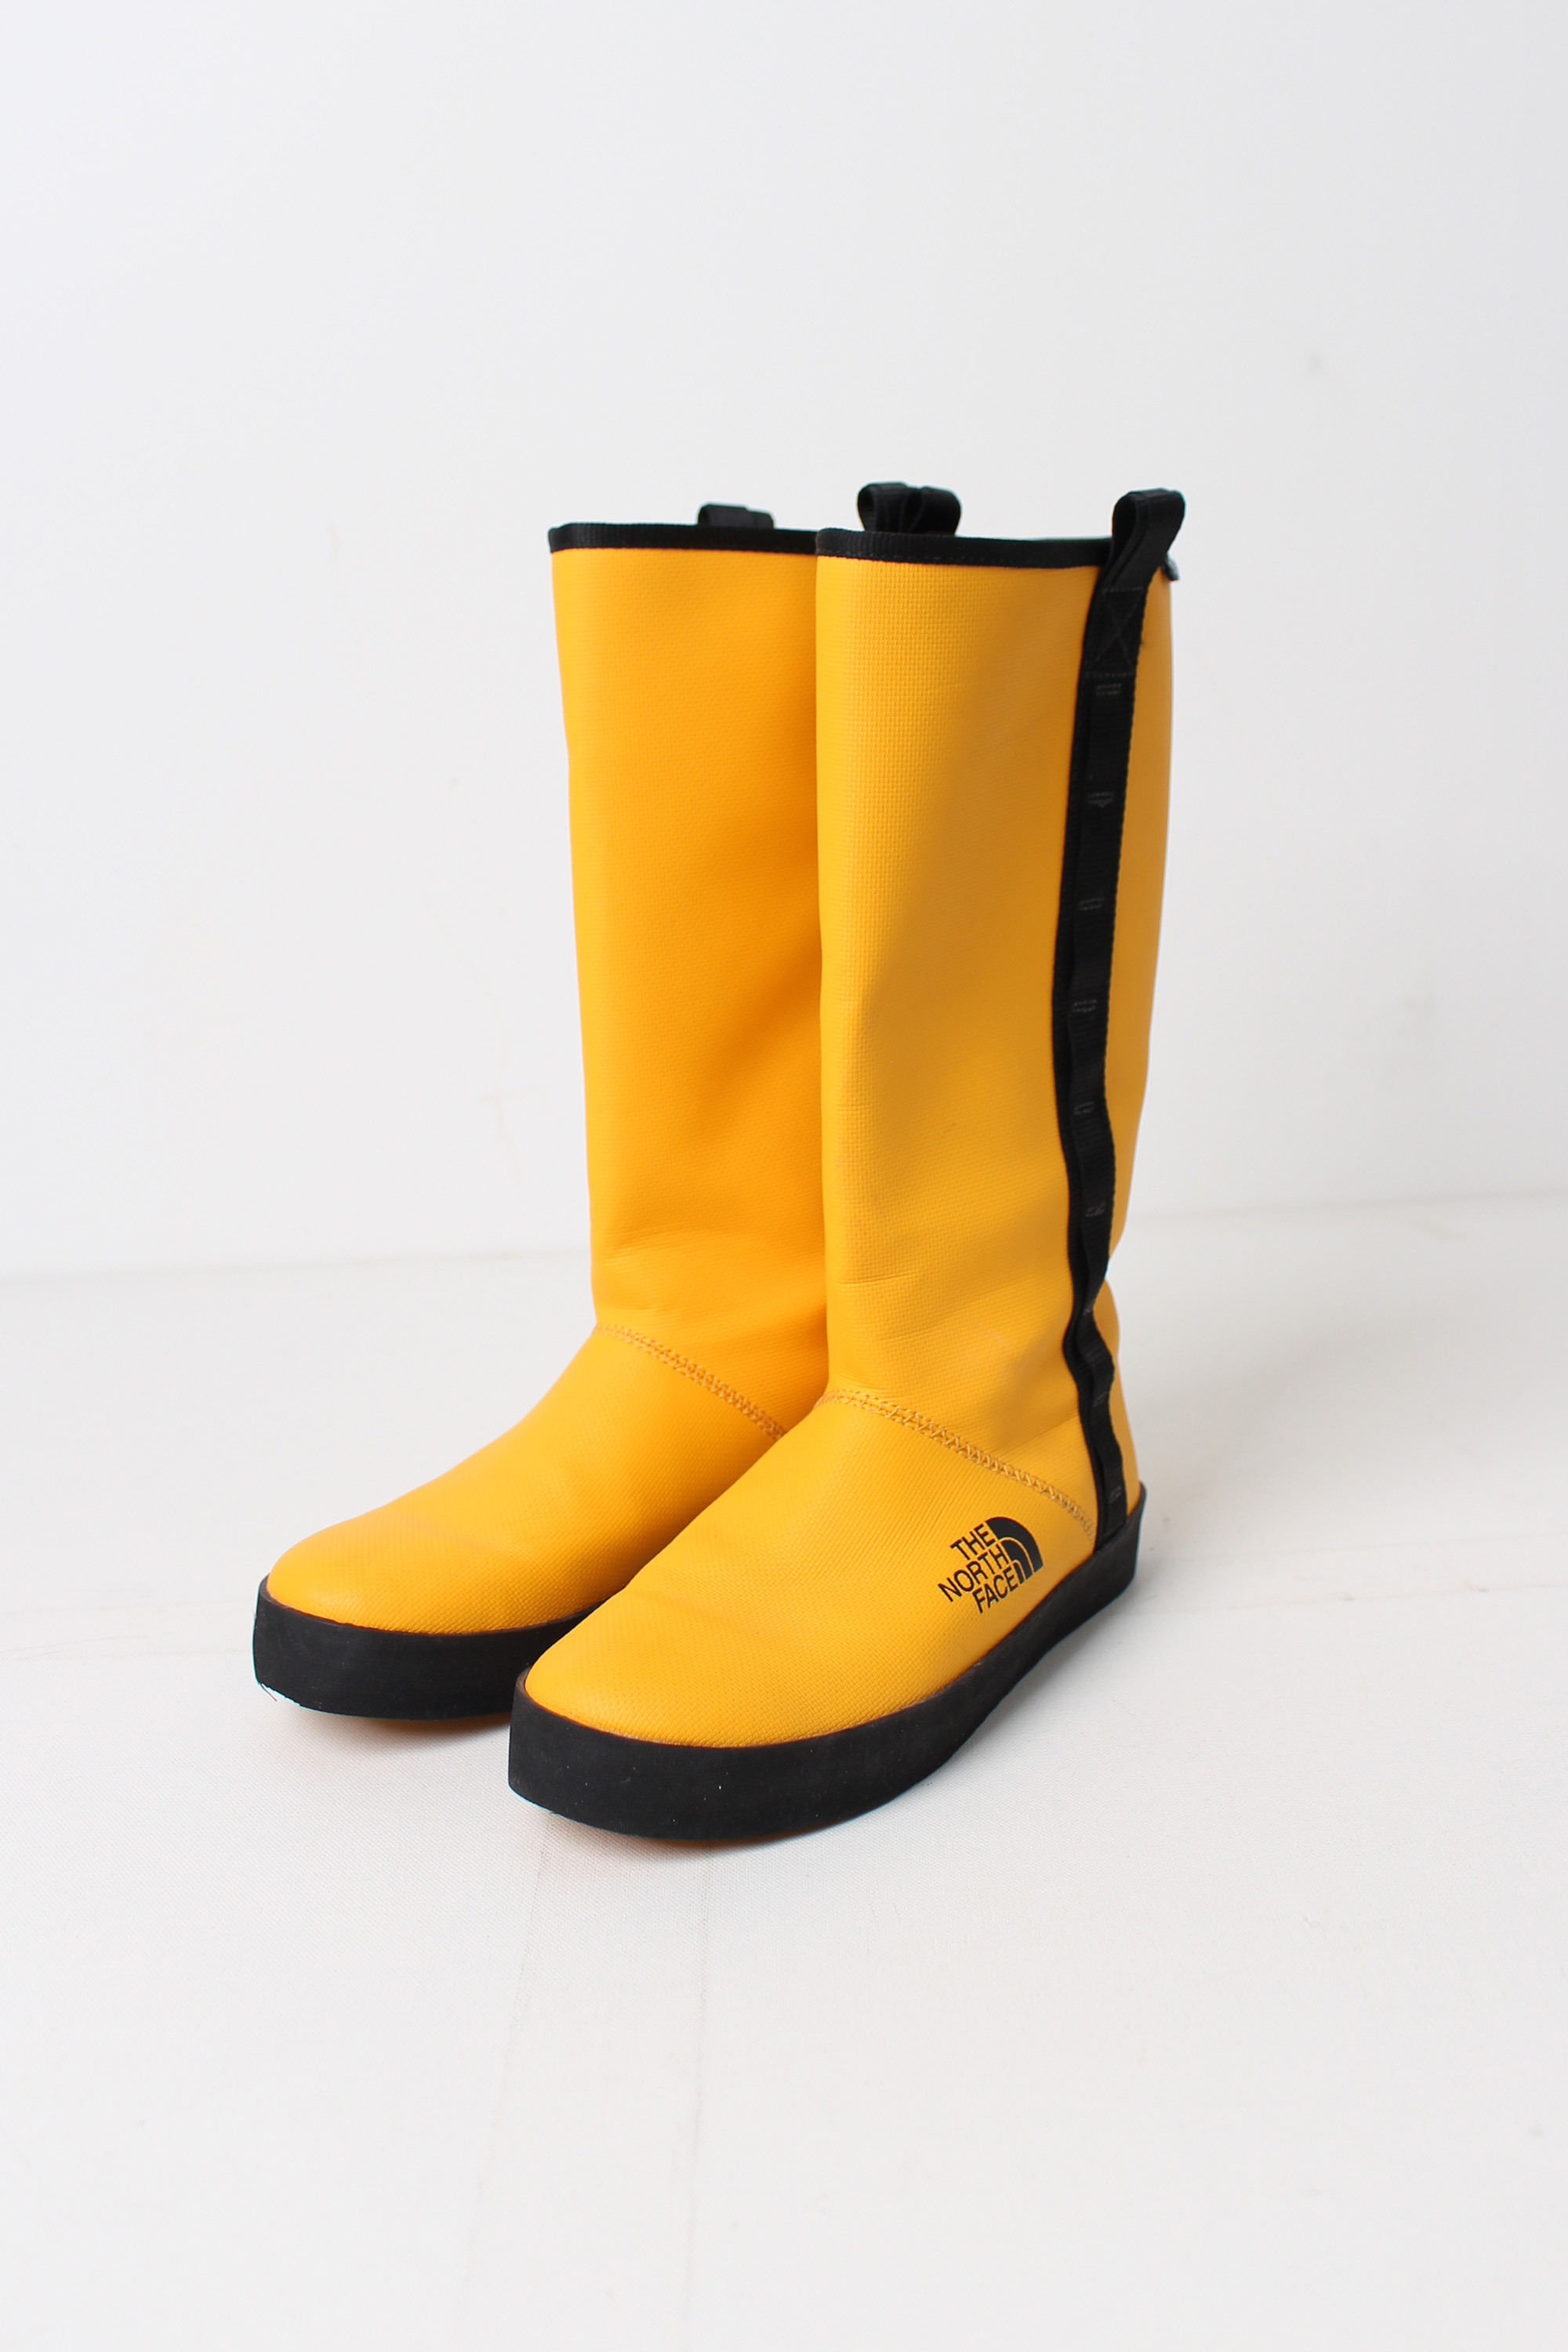 THE NORTH FACE Rain Boots